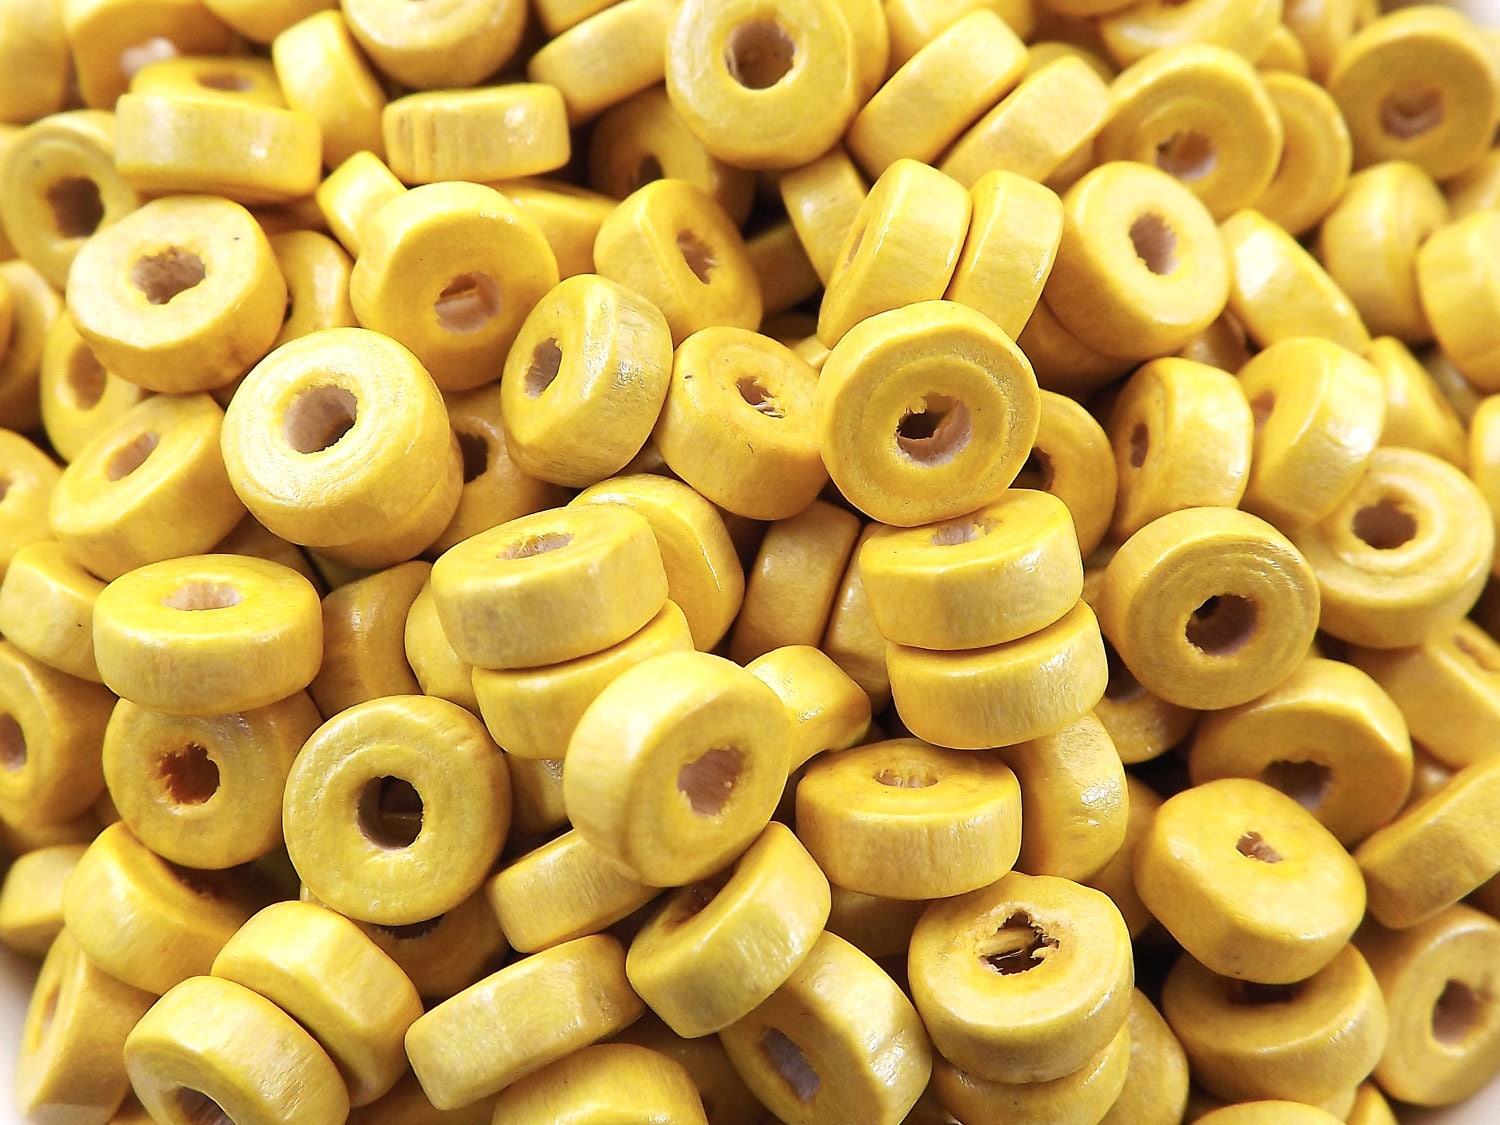 Sunny Yellow Round Rondelle Heishi Wood Beads Satin Varnished Plain Simple Round Smooth Ball Bead Spacers 8mm Choose 50pcs, 200pcs or 400pcs